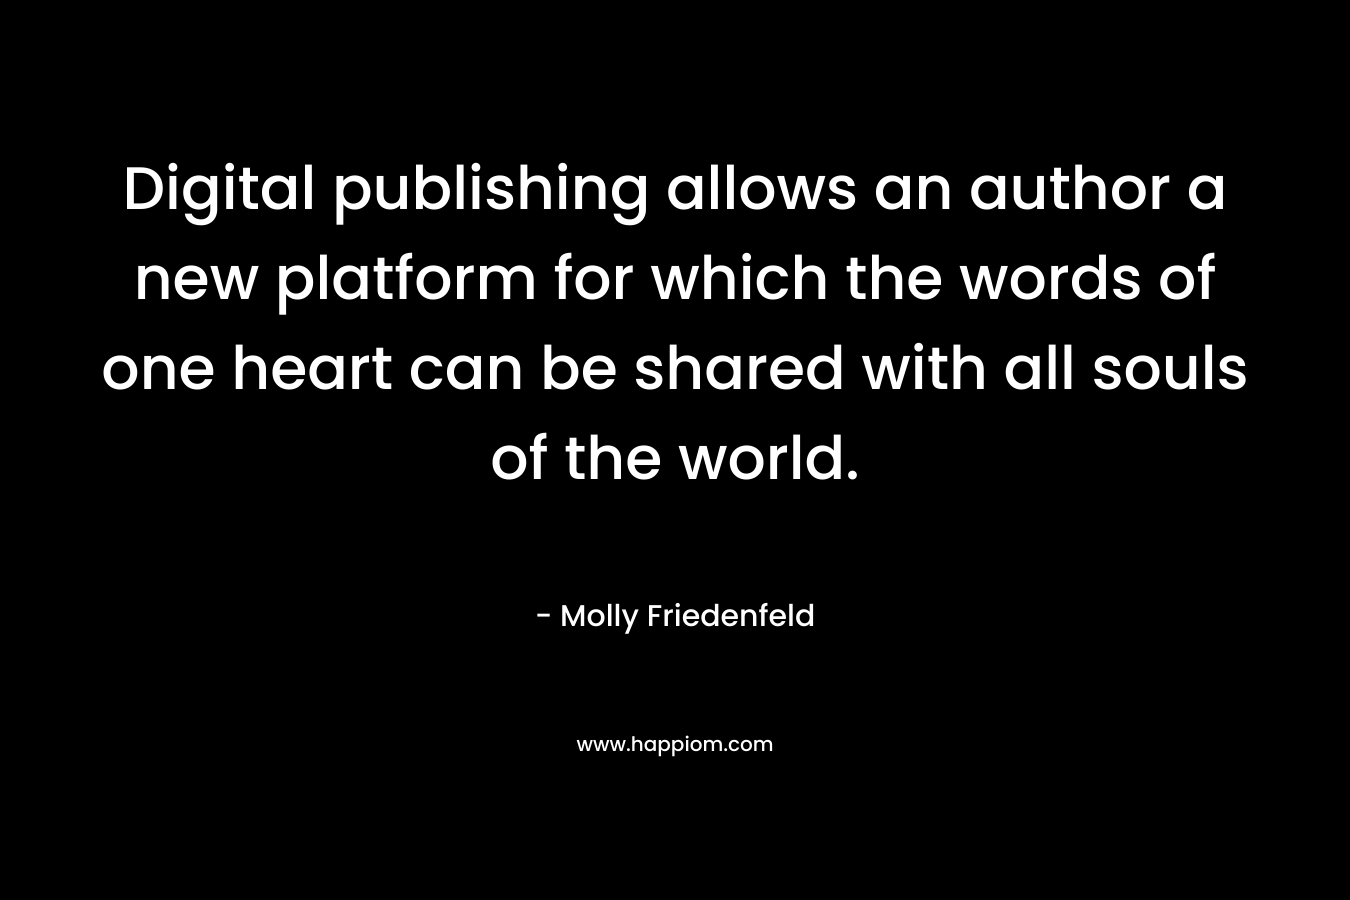 Digital publishing allows an author a new platform for which the words of one heart can be shared with all souls of the world.